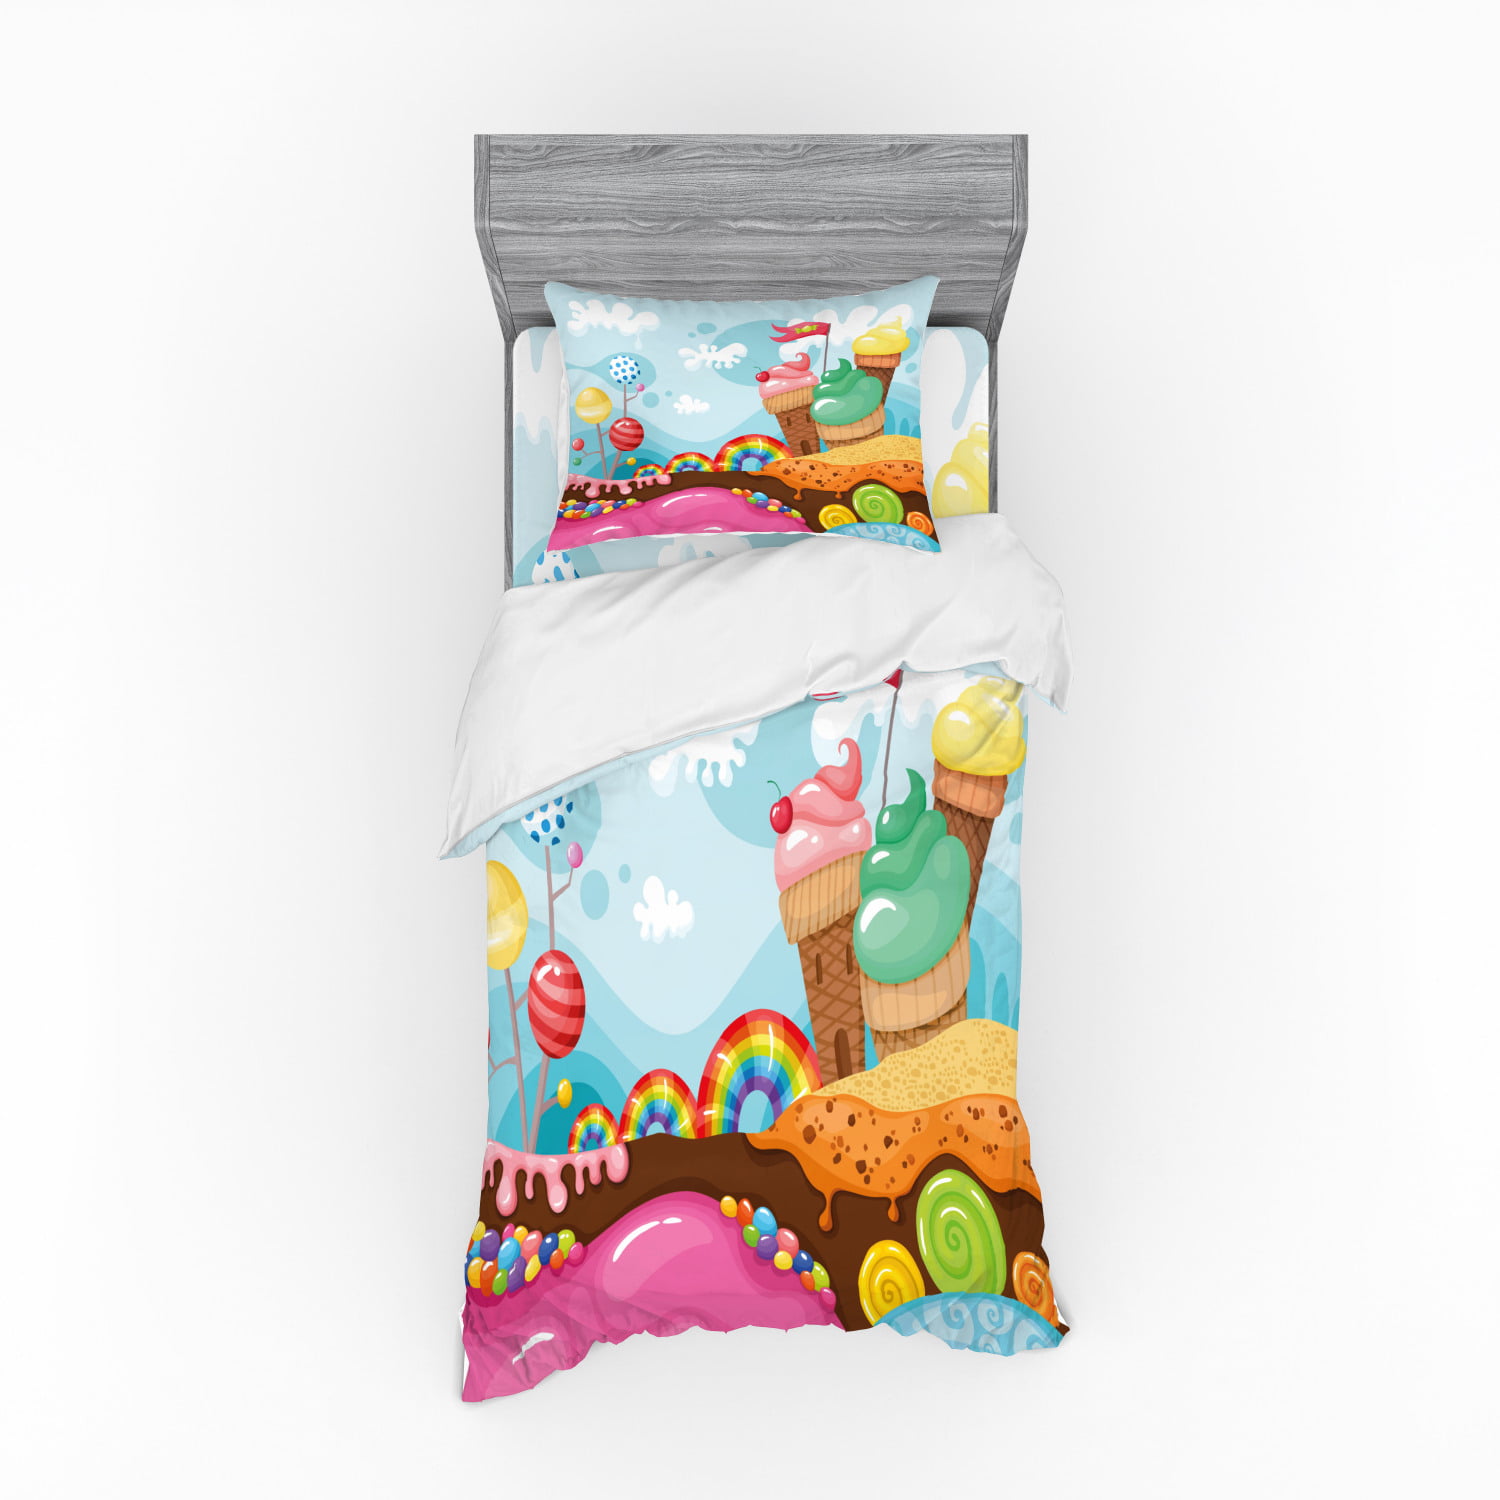 Ambesonne Ice Cream Pillow Sham Pink Blue Dessert Land with Rainbow Candies Lollipop Trees and Cupcake Mountains Style of Cartoon Art Decorative Standard Queen Size Printed Pillowcase 30 X 20 